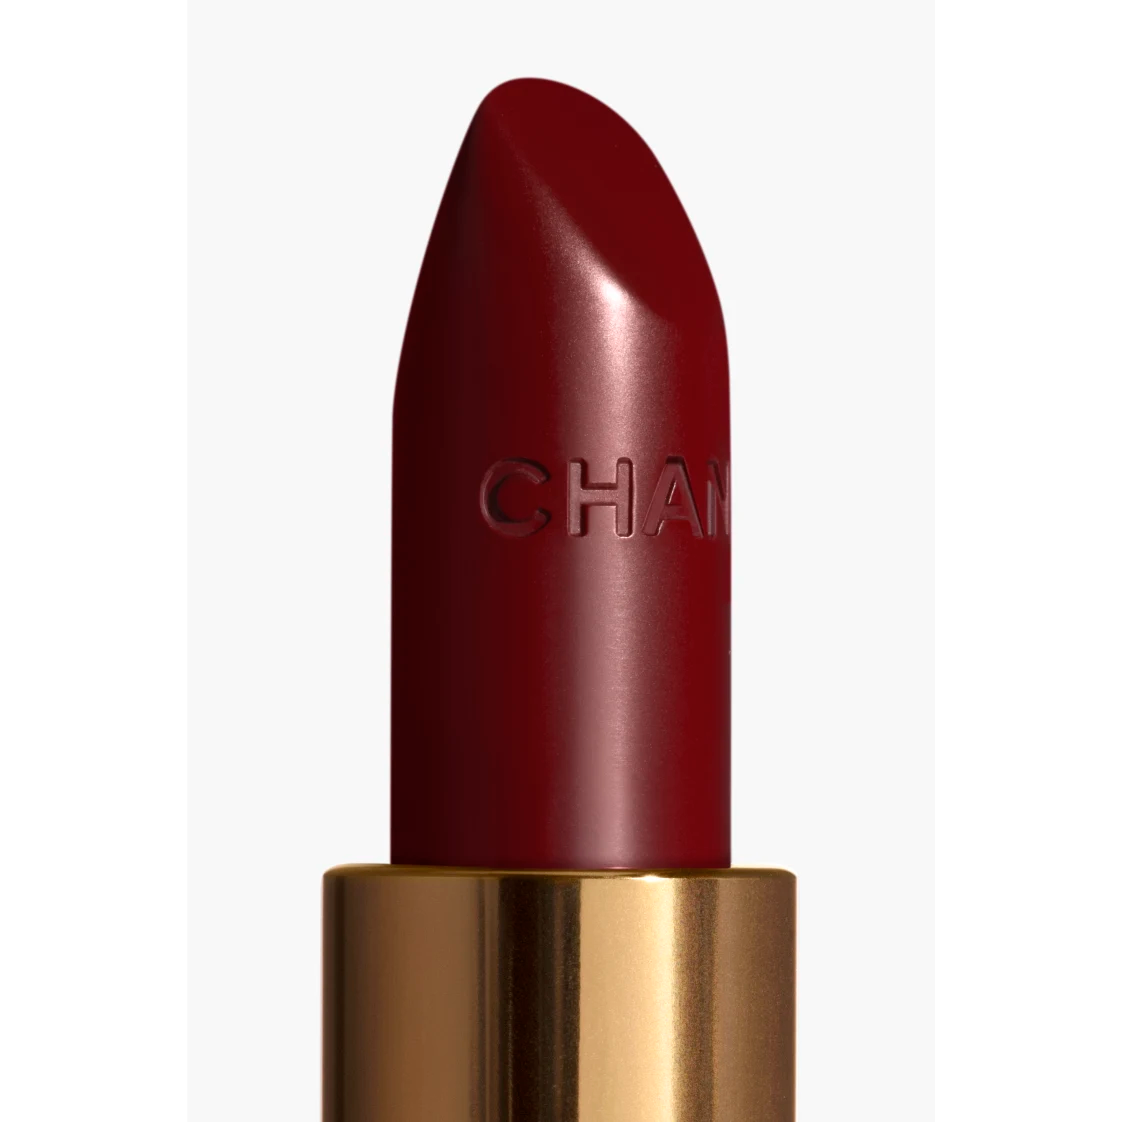 Chanel Rouge Coco Tester lipstick with plastic cap